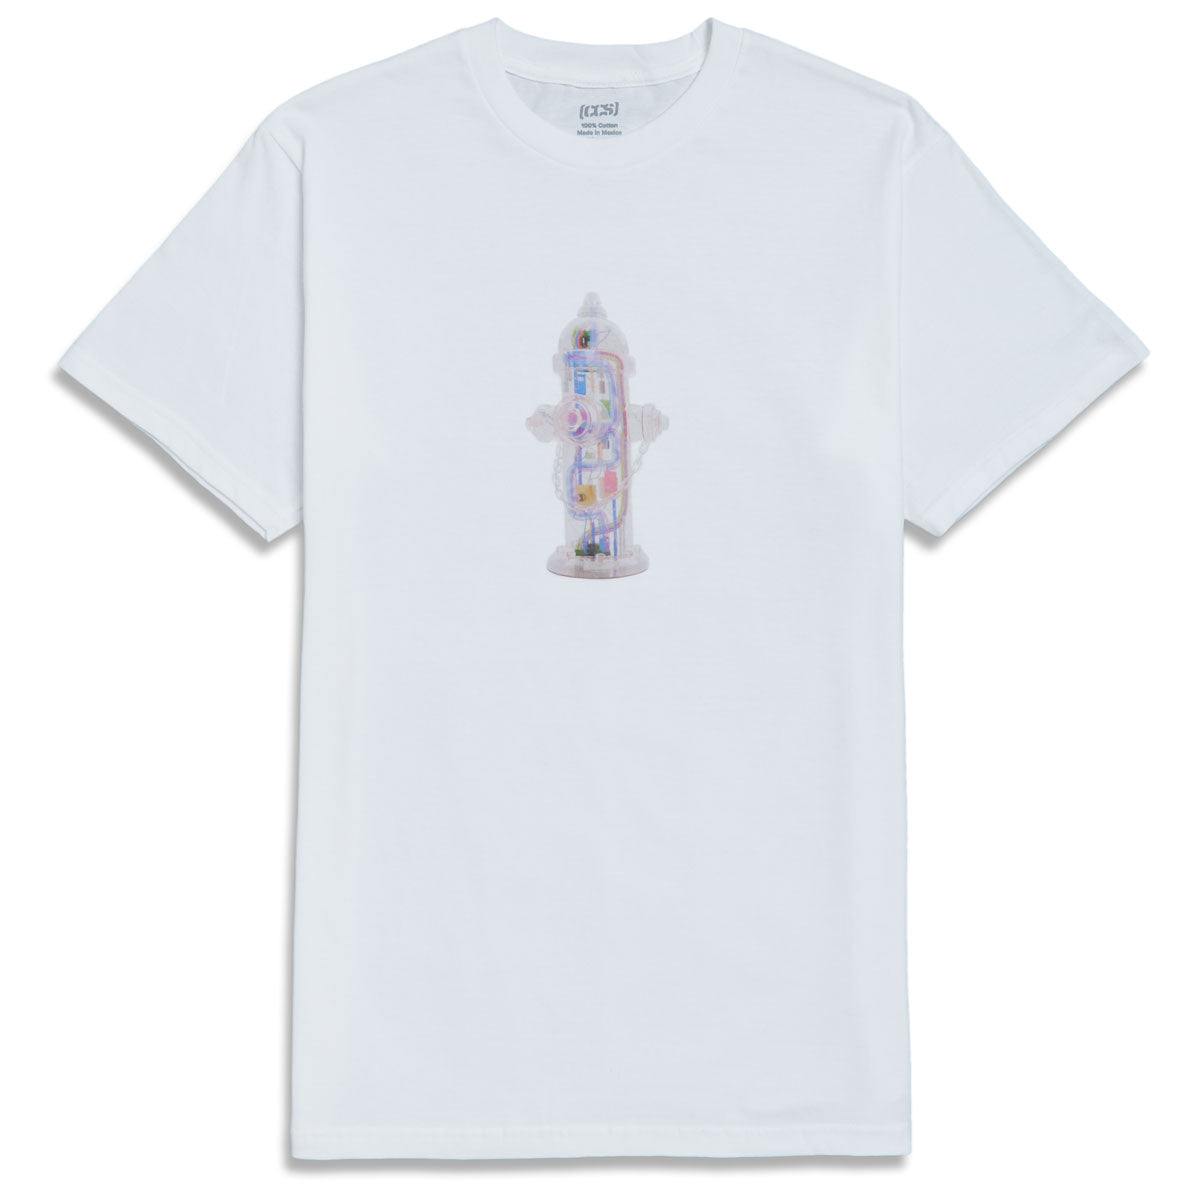 CCS Going Clear Hydrant T-Shirt - White image 1